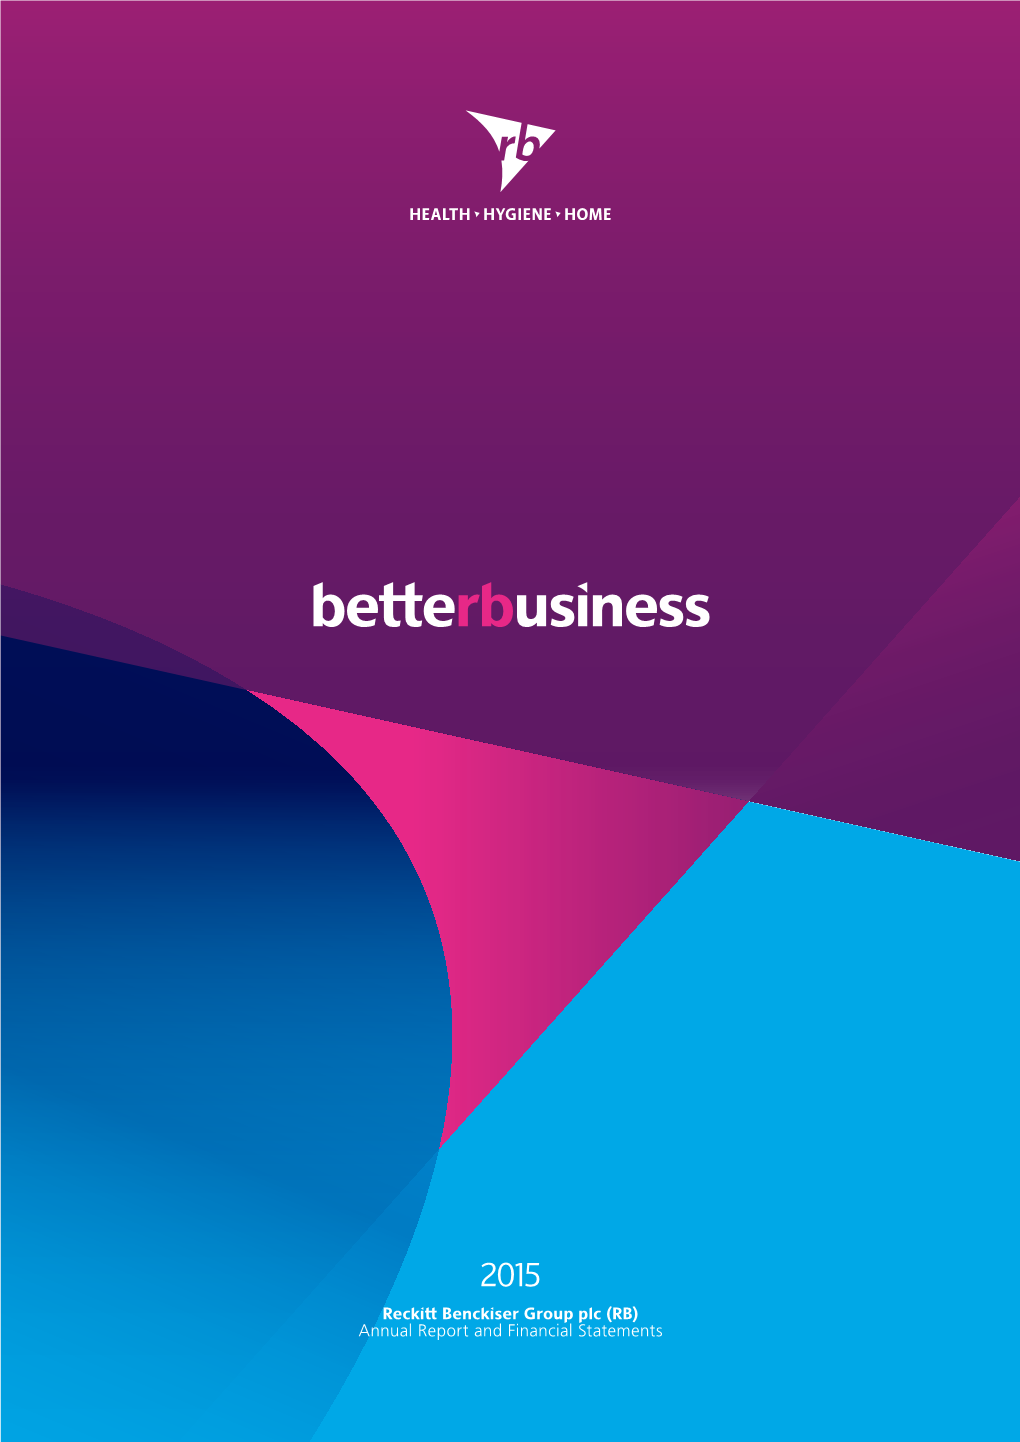 Betterbusiness Betterfinancials How We Drive Growth and Outperformance